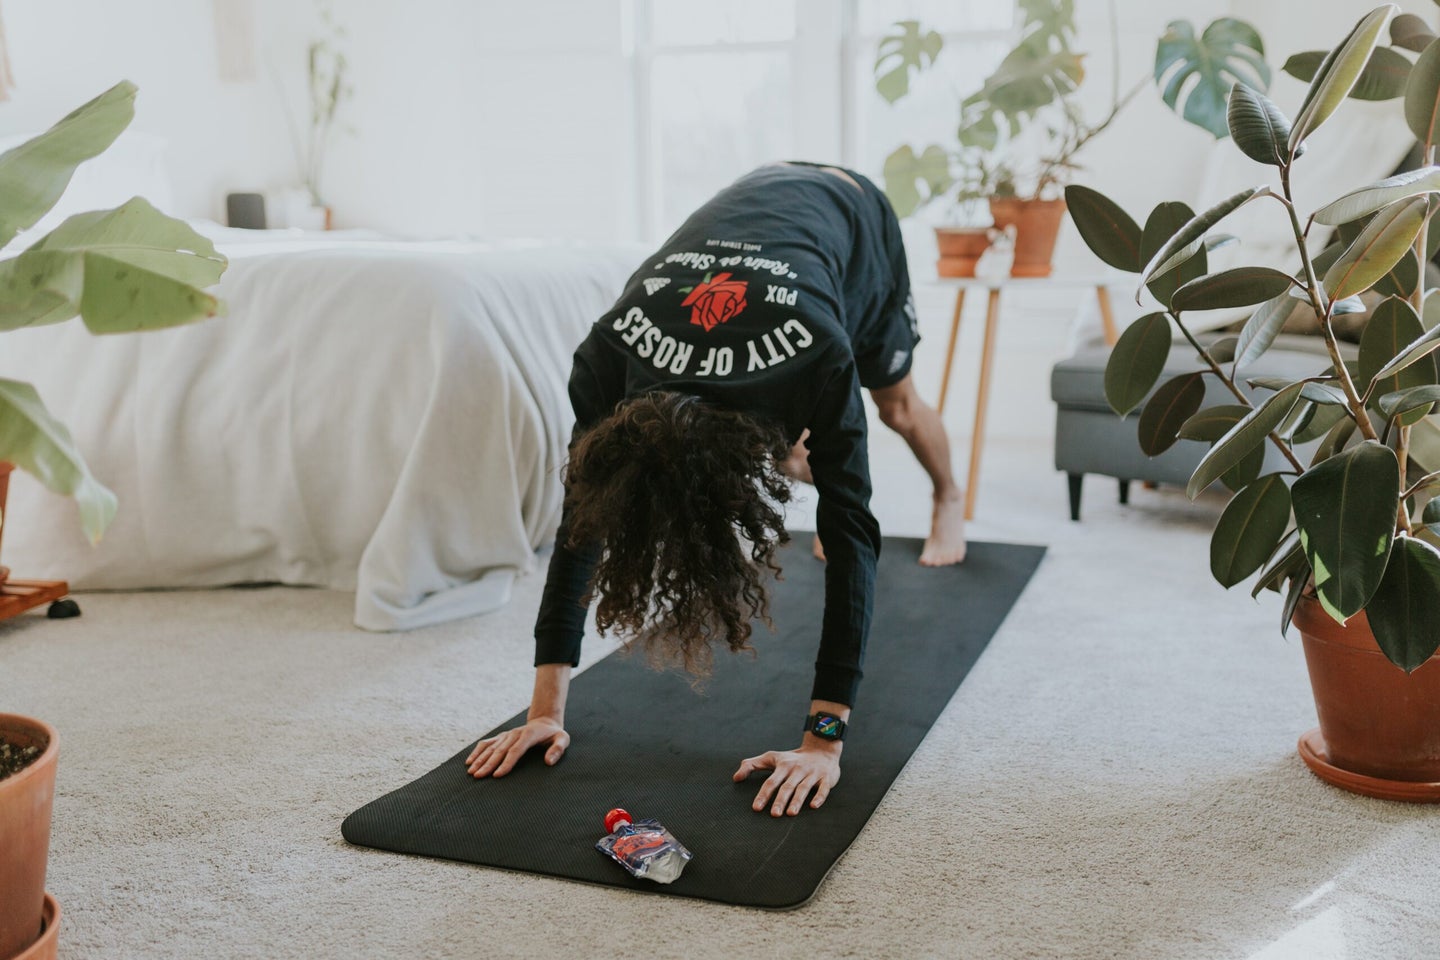 A person wearing a t-shirt and shorts doing yoga on a black yoga mat in a white bedroom near some plants.